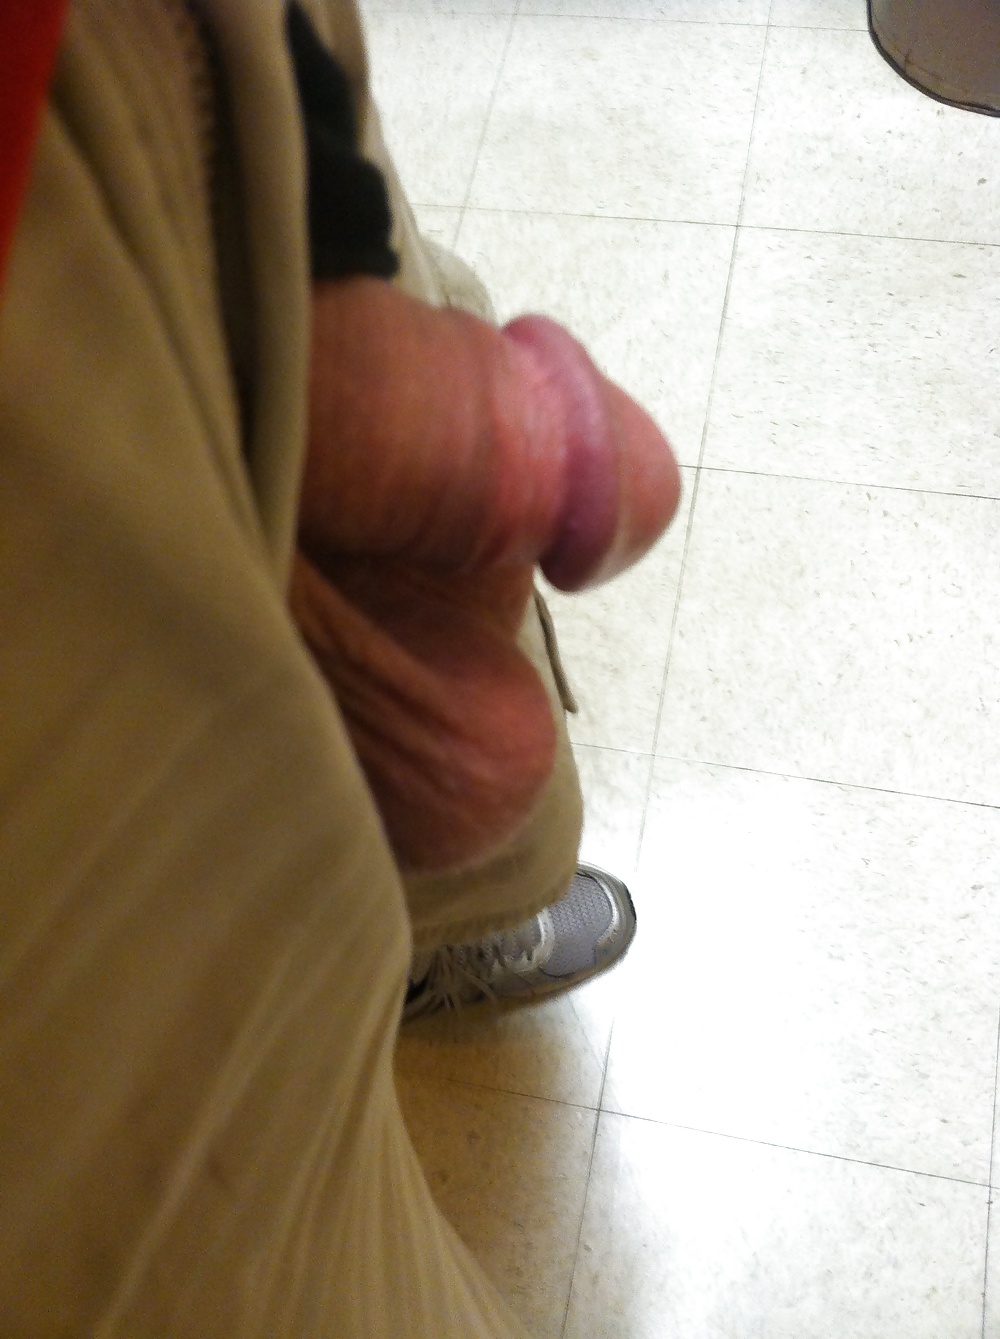 Lots of my cock and my big balls! #32317239